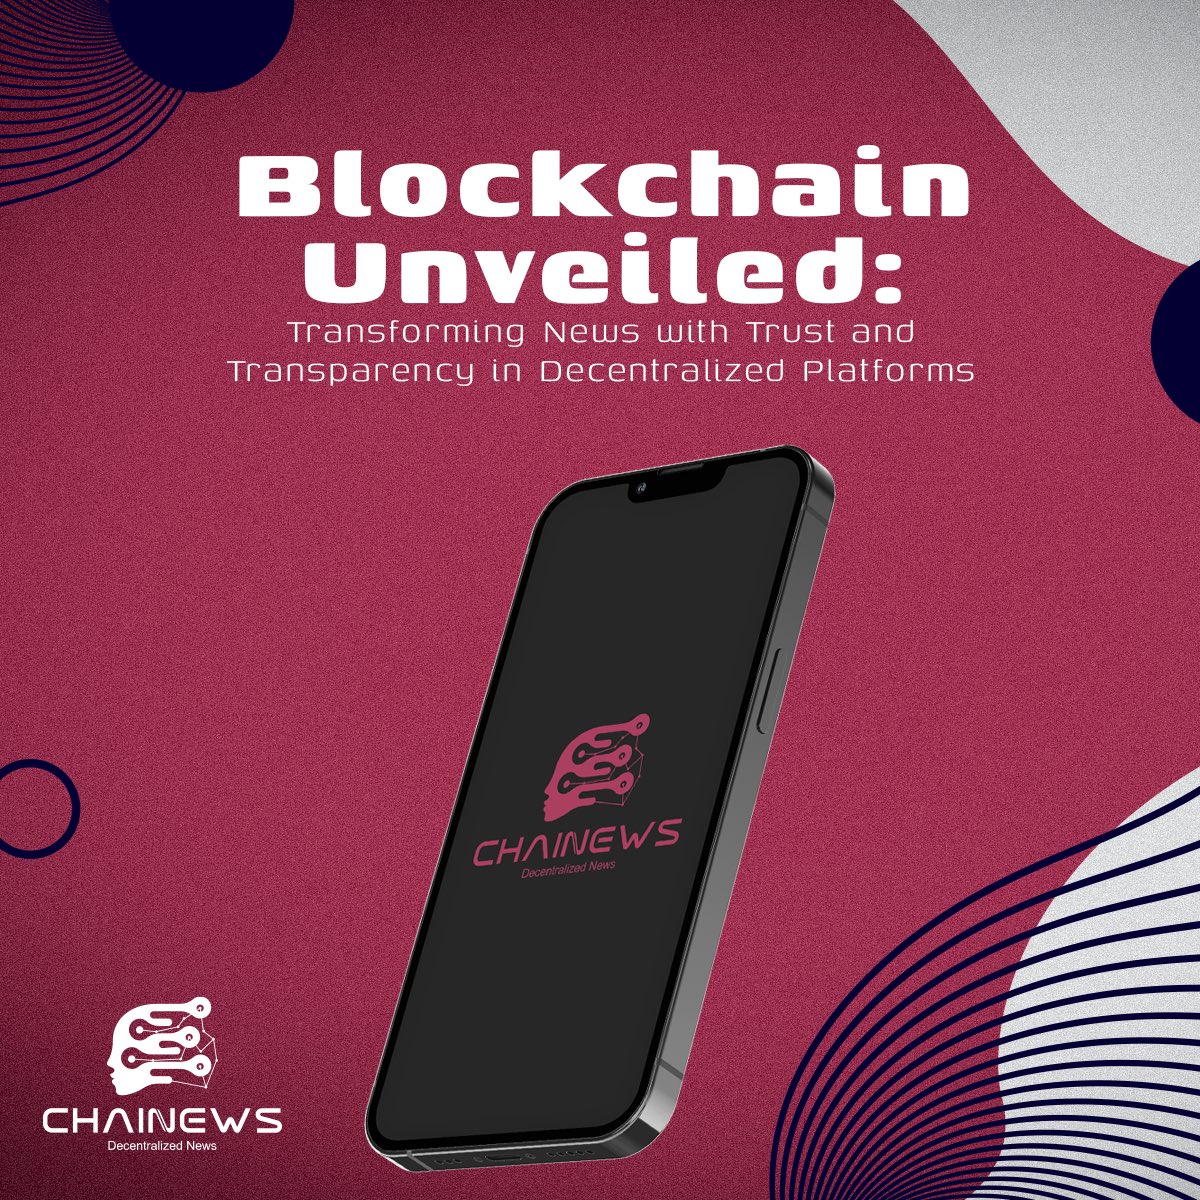 Chainews blog page is online! Blockchain Unveiled: Transforming News with Trust and Transparency in Decentralized Platforms. You can visit our website to read. 🌐 chainews.org #blockchain #blockchaintechnology #blockchainnews #blockchains #blockchaineum #chainews